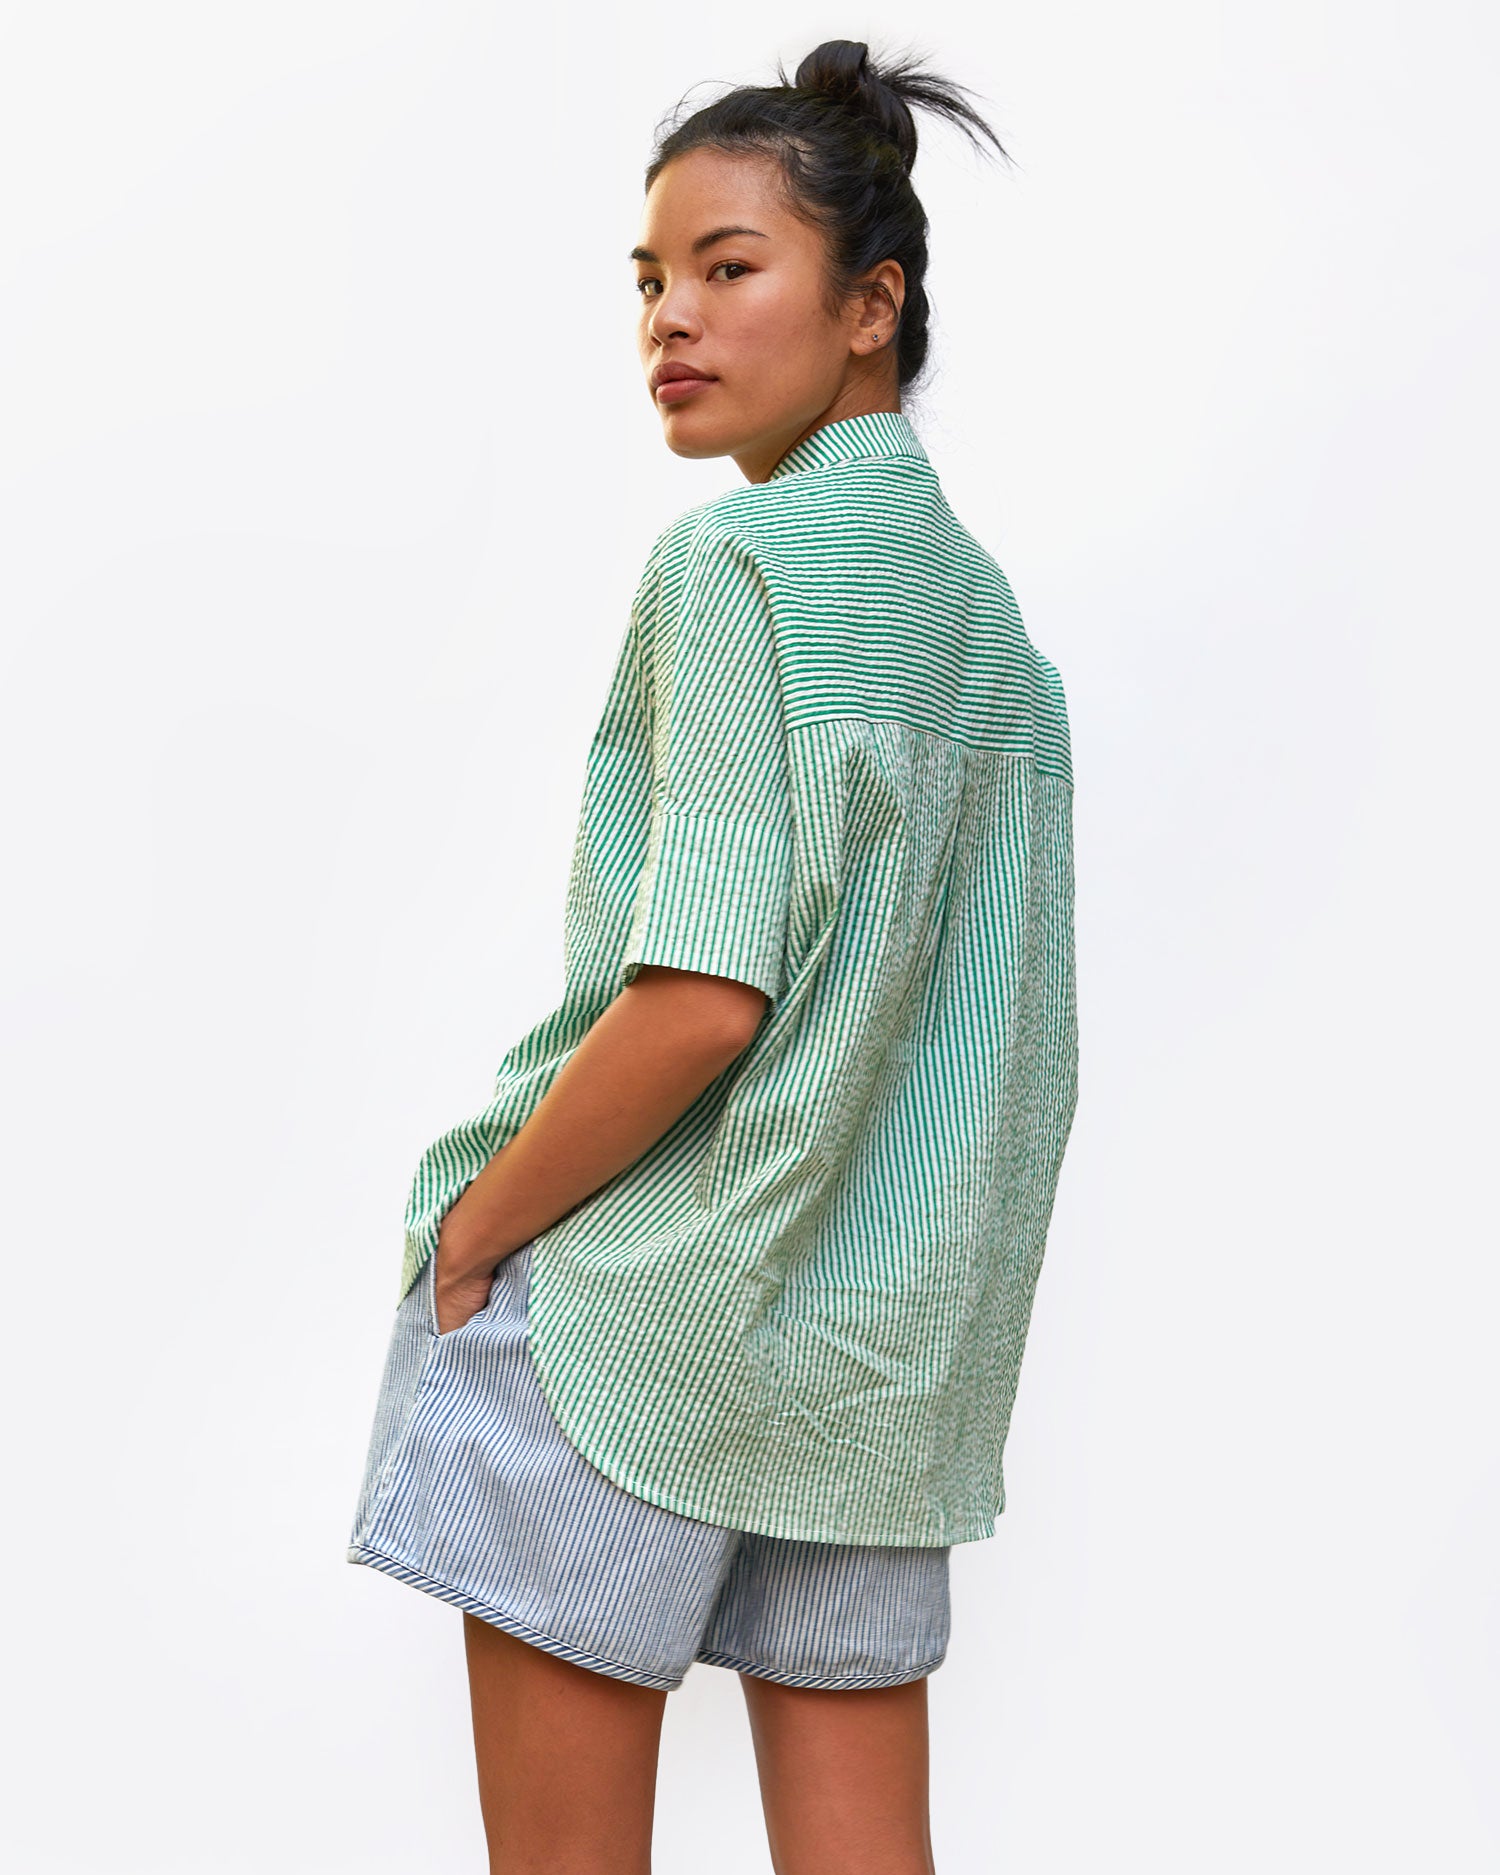 back view of sandra in the Oversized Stand Collar Shirt in Green and Cream Stripe